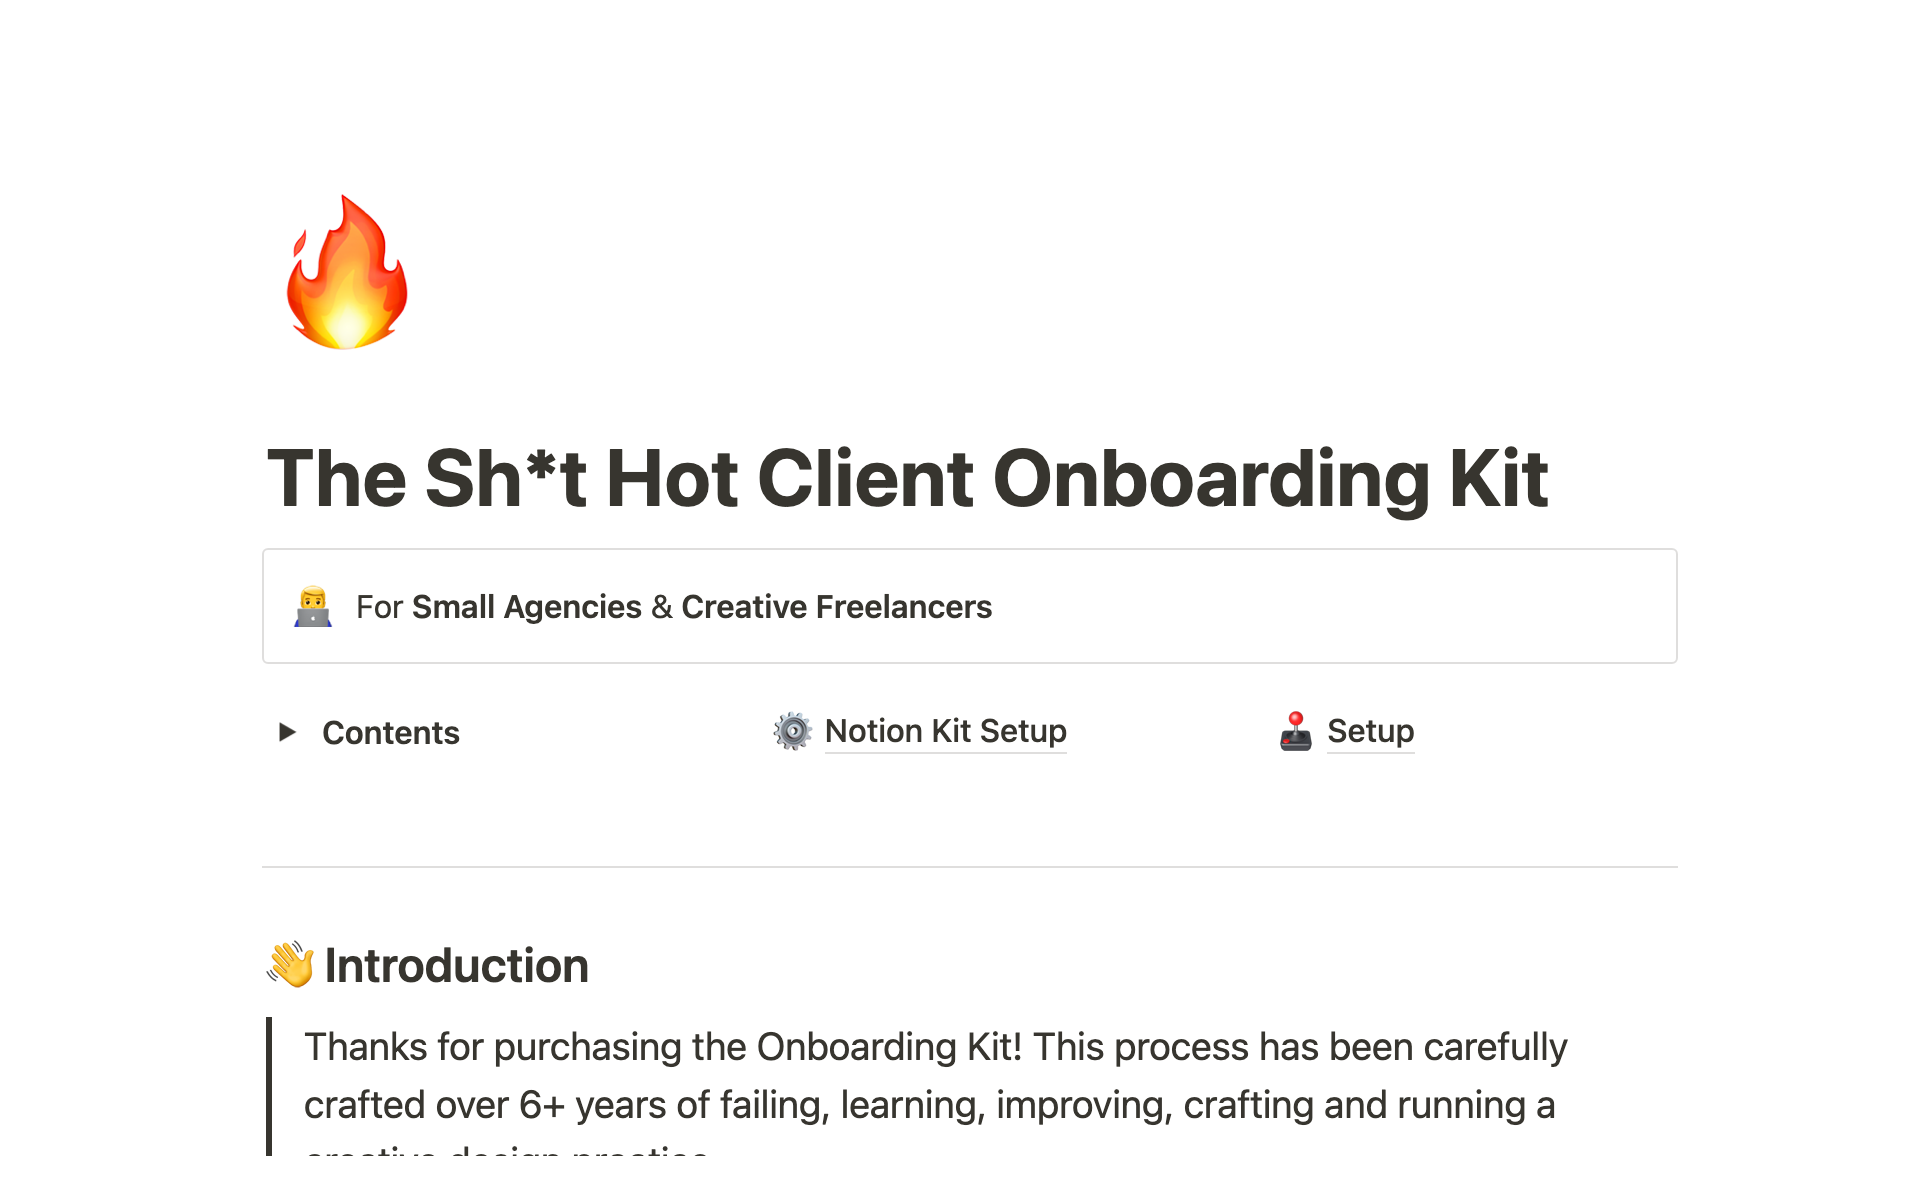 An easy-to-use, time-saving, no-nonsense kit for freelancers and small agencies looking to have better documentation, security and process for big fish clients.